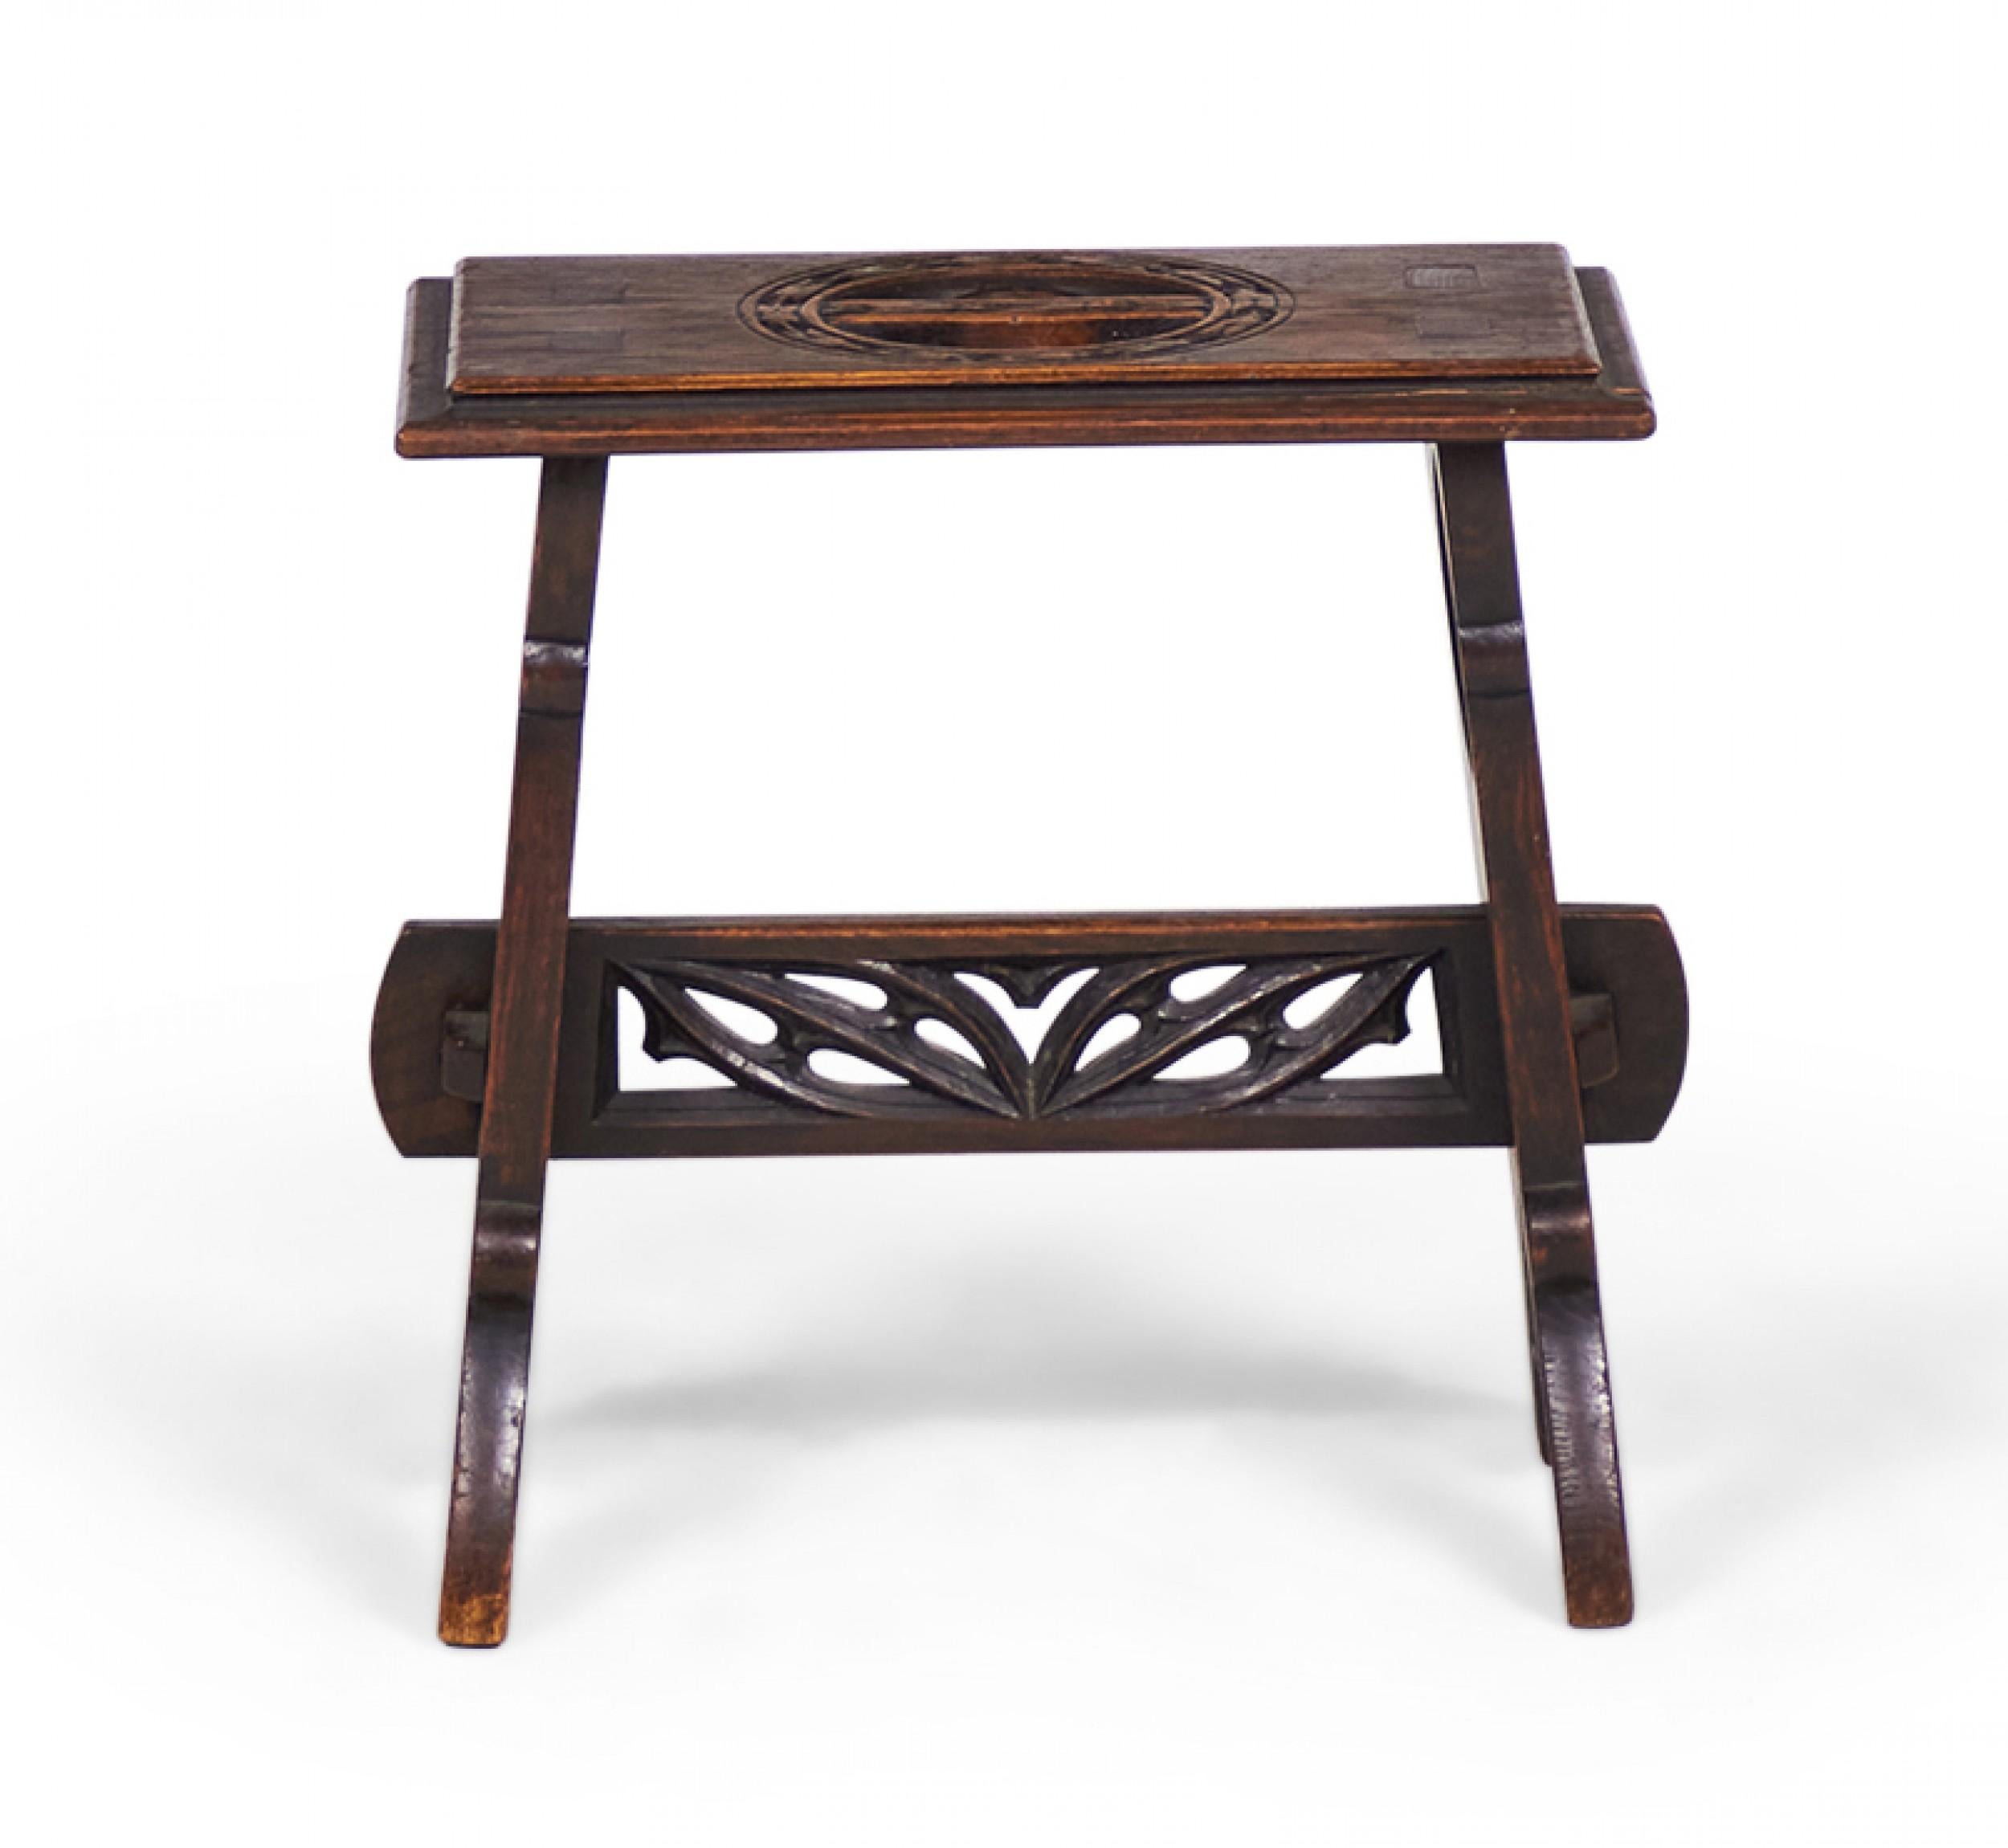 Pair of English Gothic-Style (19/20th Century) carved mahogany benches with a four-four point clover design on the sides and tops and a stretcher base. (PRICED AS PAIR).